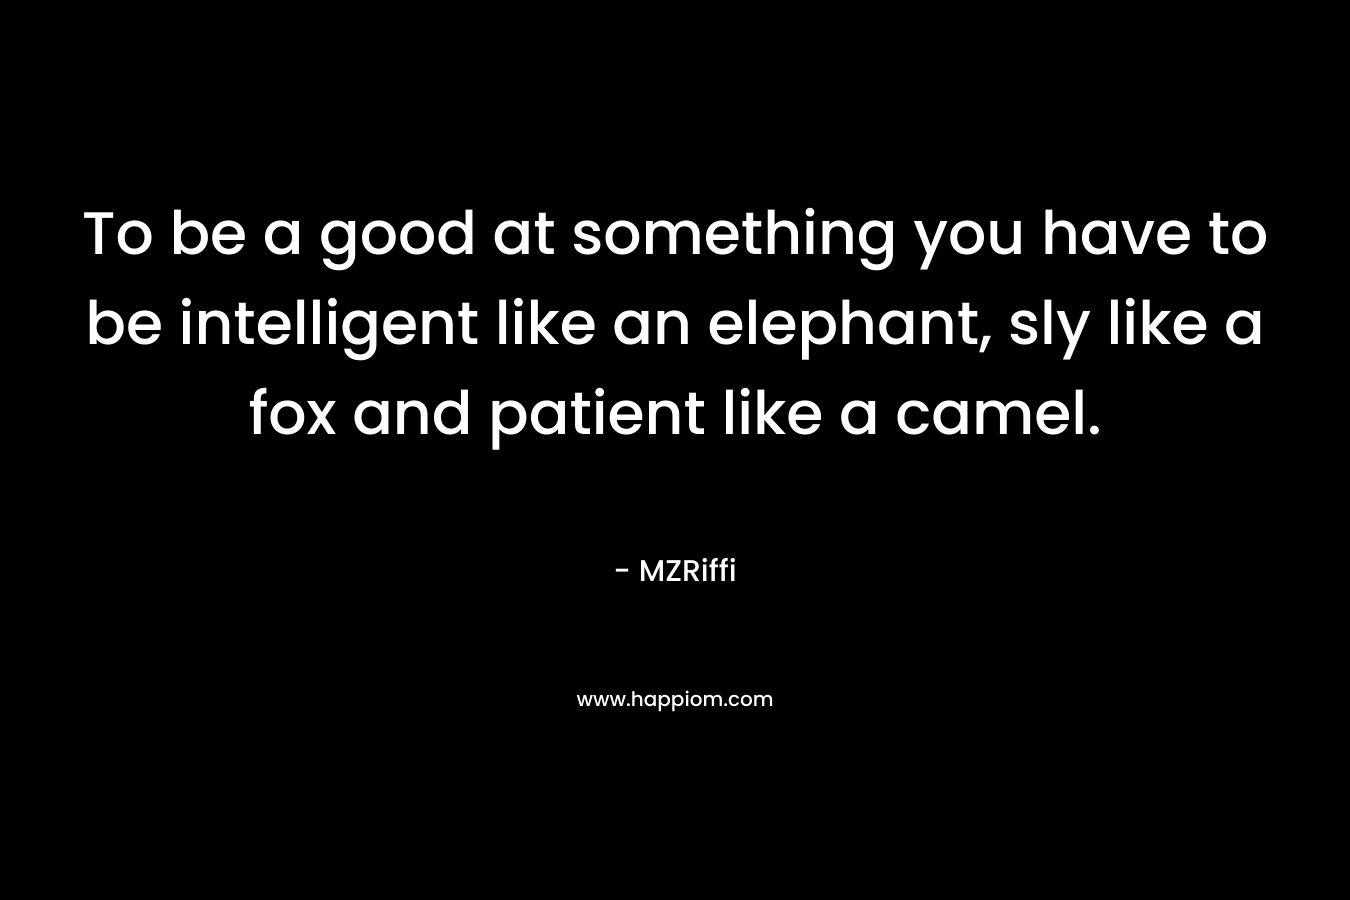 To be a good at something you have to be intelligent like an elephant, sly like a fox and patient like a camel. – MZRiffi